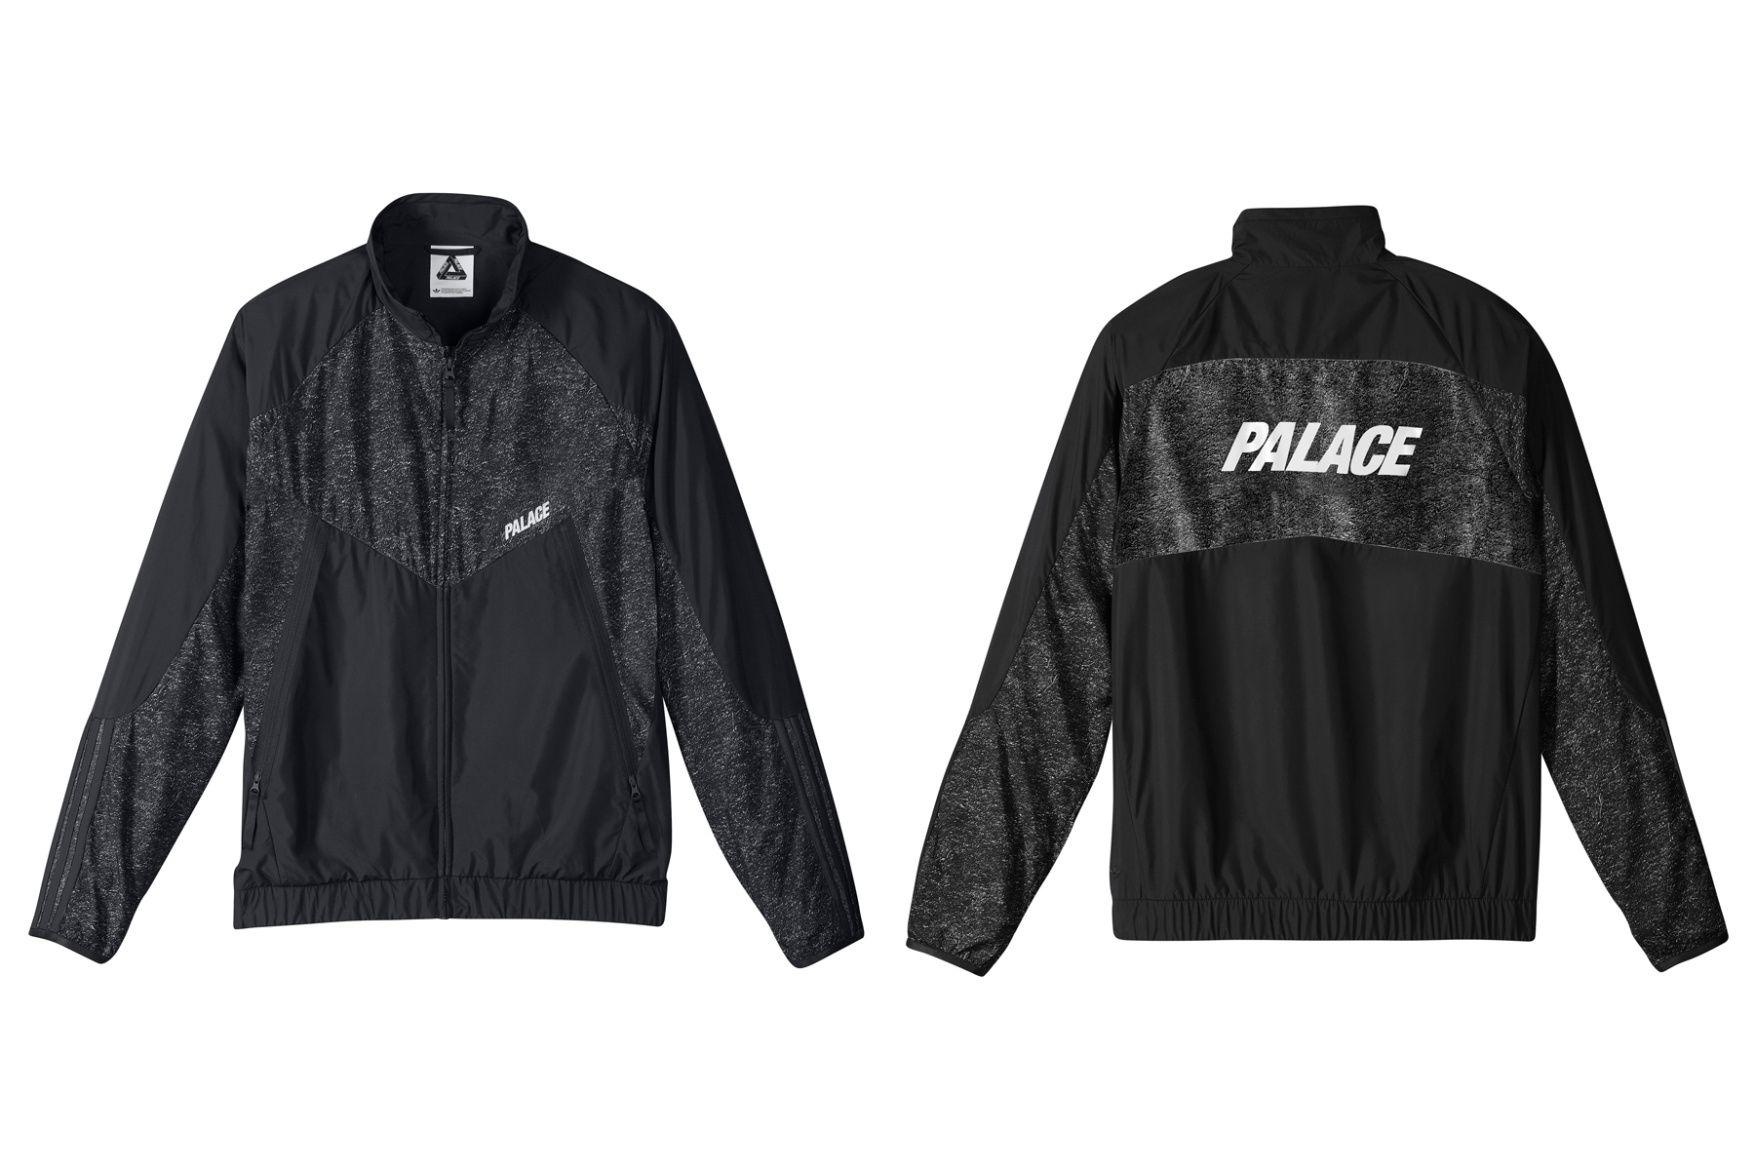 Adidas X Palace Clothing Logo - Palace Skateboards Unveils Part 2 of Their adidas Collection – The ...